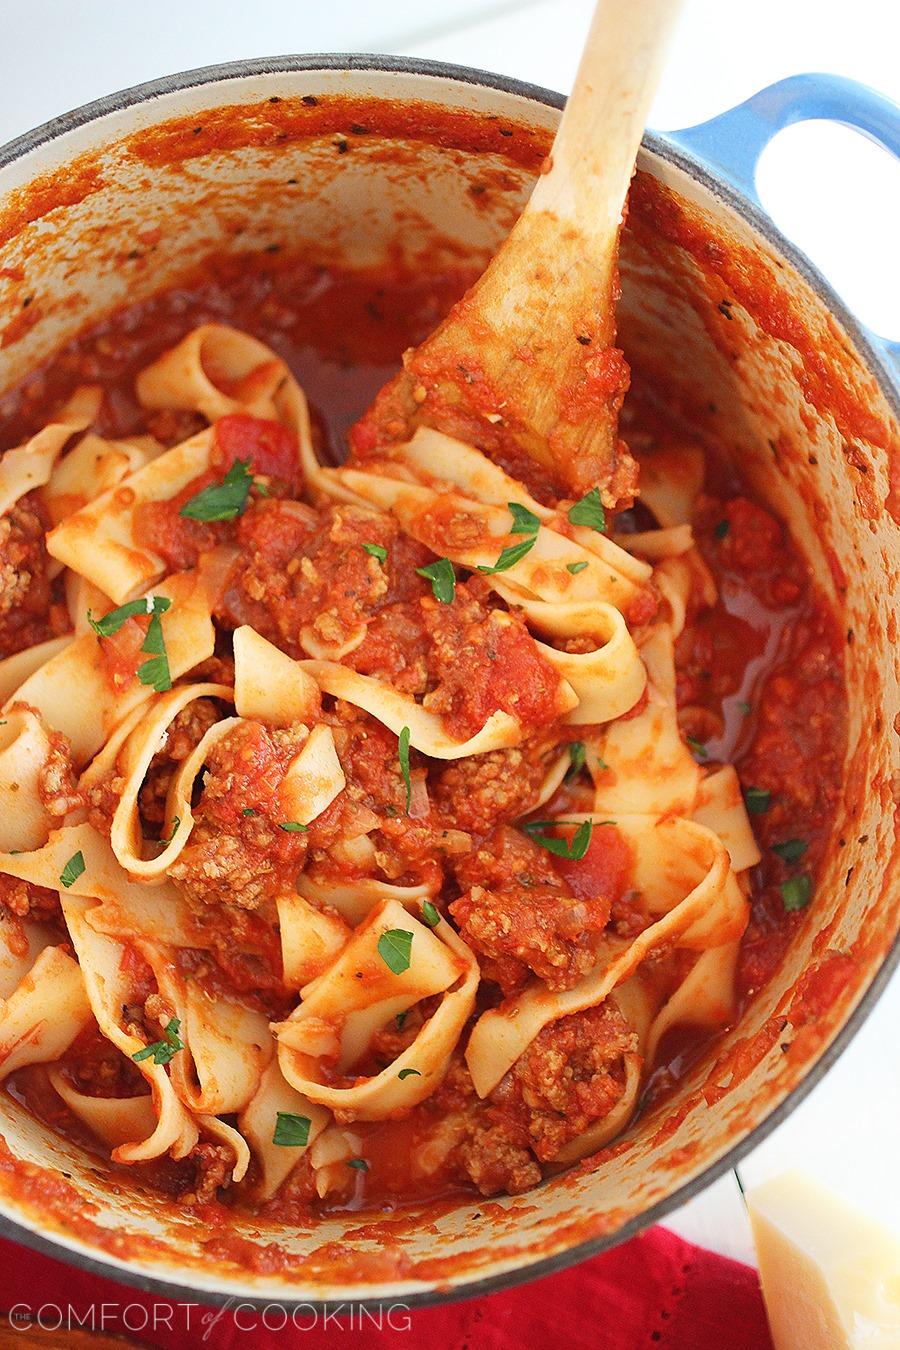 30-Minute Weeknight Pasta Sauce – Simmer this scrumptious, meaty pasta sauce for just 30 minutes, serve a salad alongside, and dinner is done! | thecomfortofcooking.com